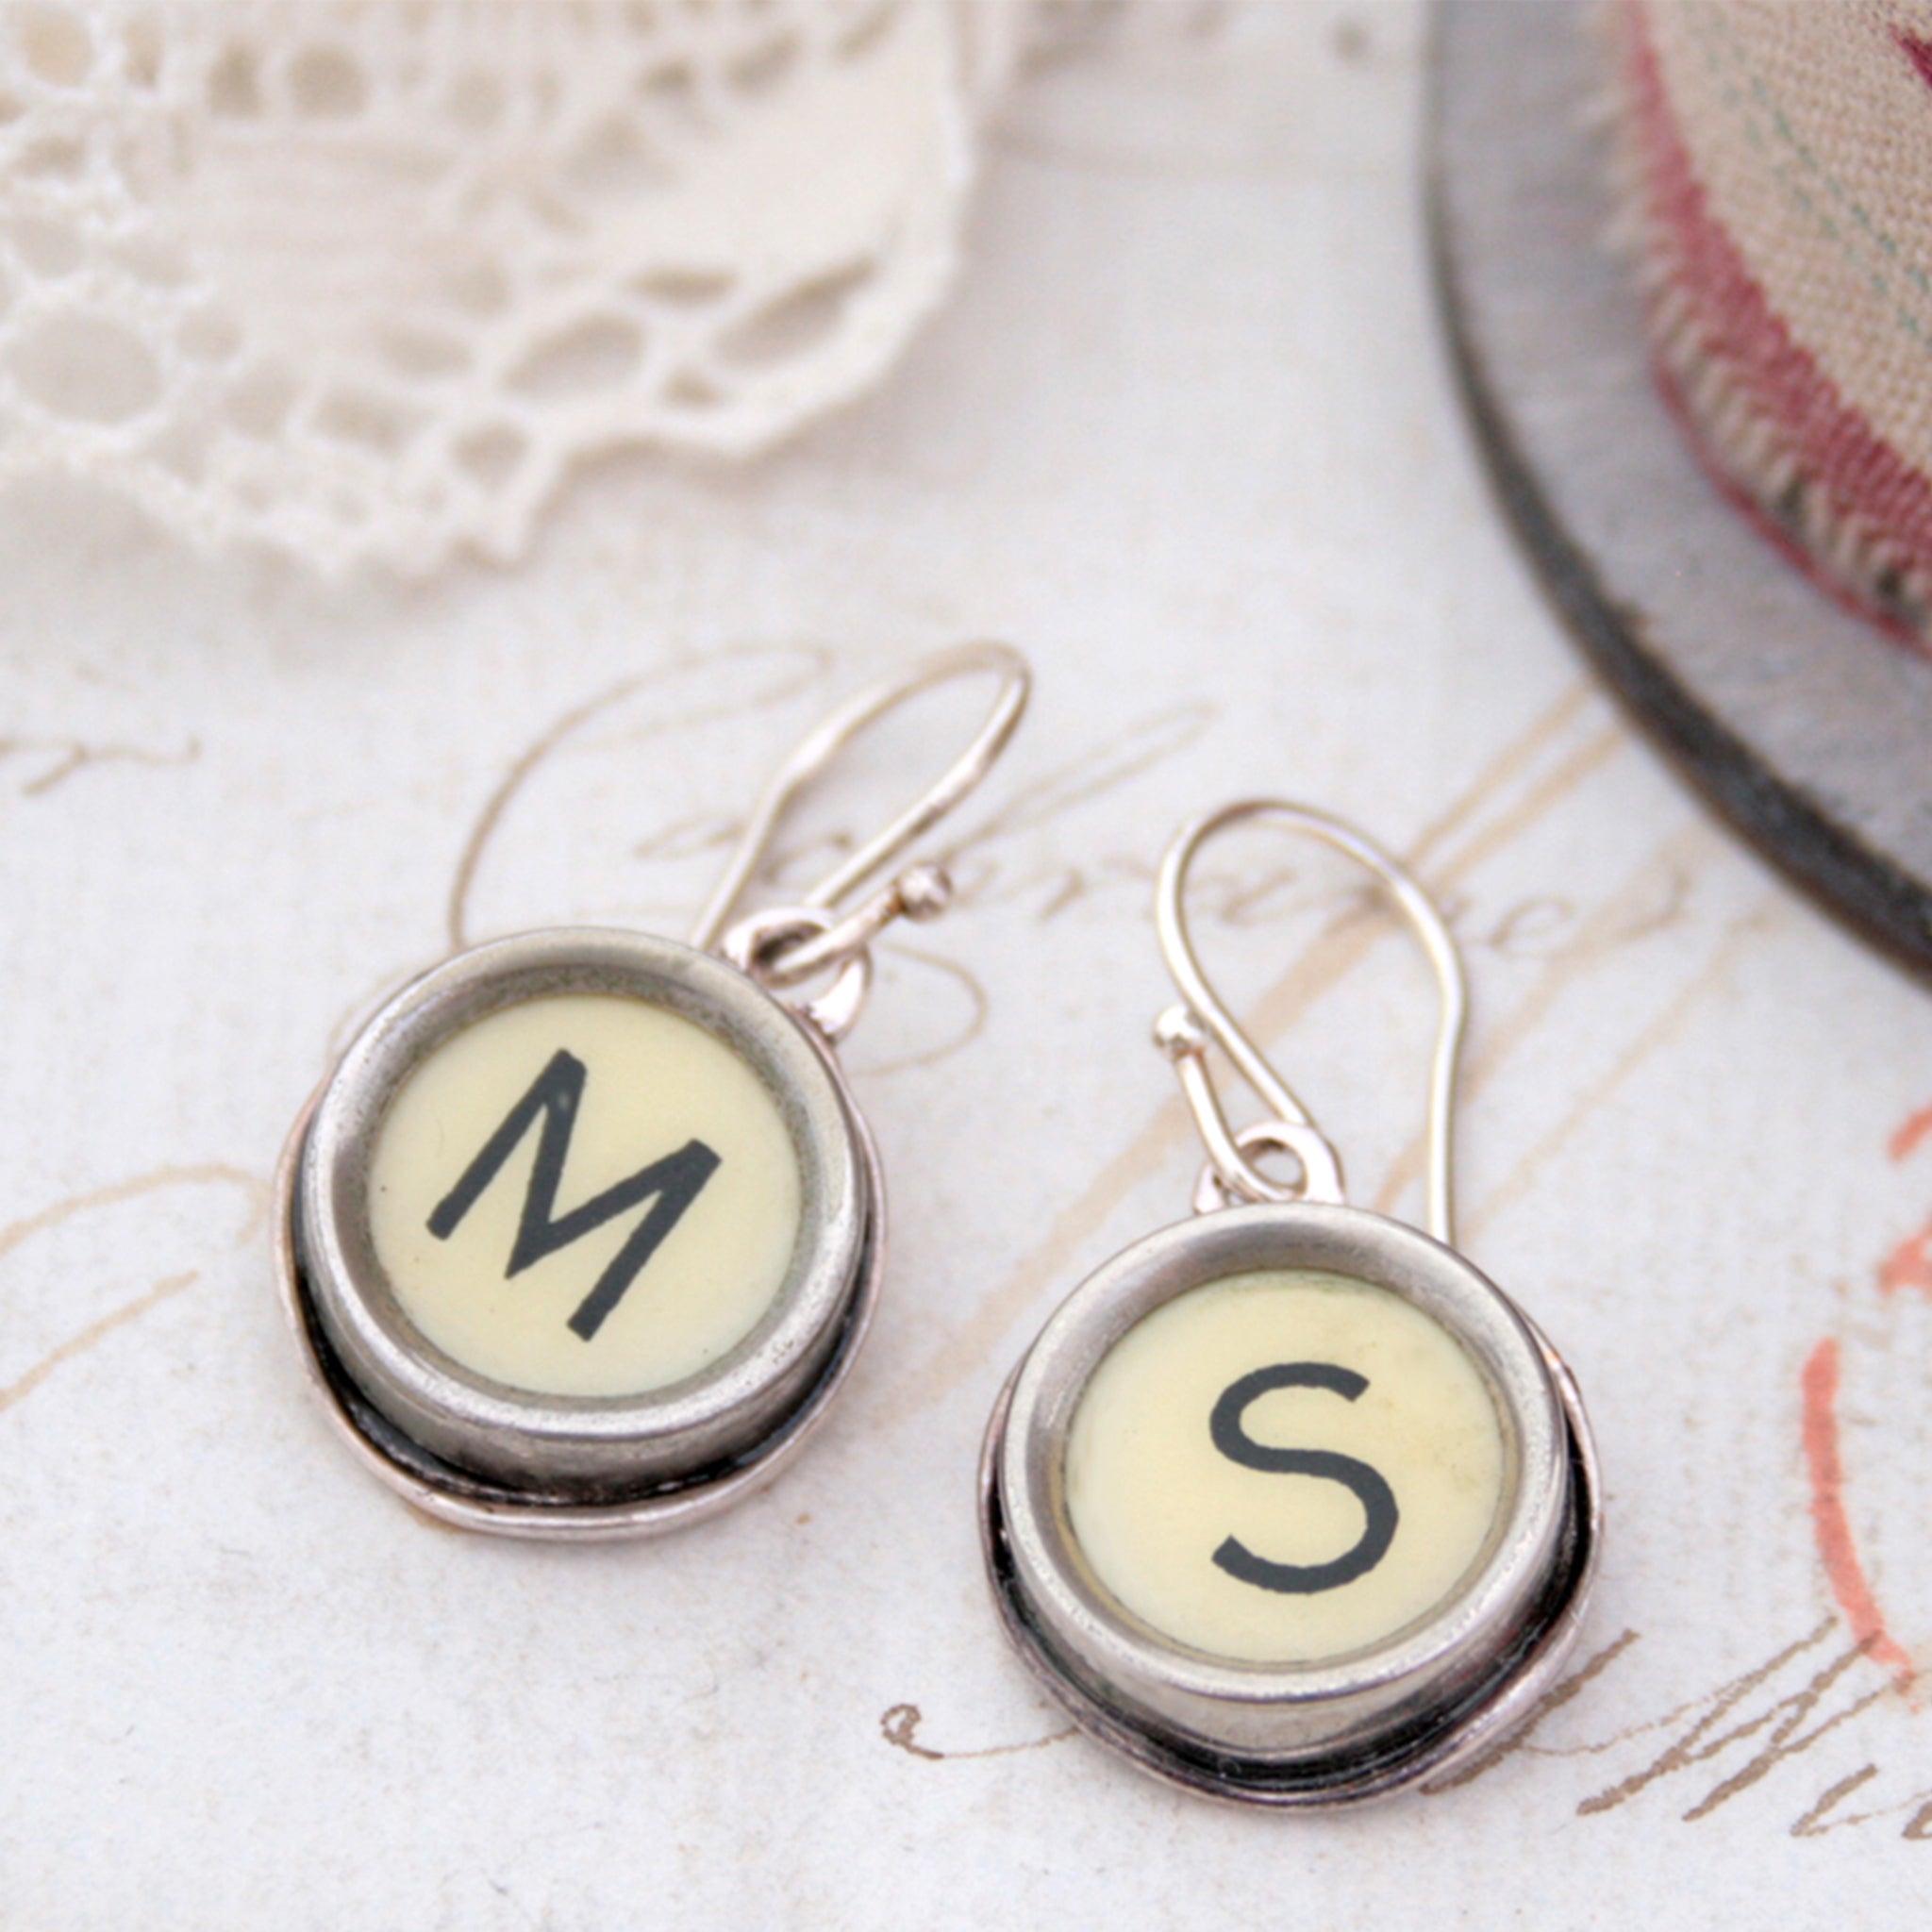 personalised initial earrings made of real typewriter keys M and S